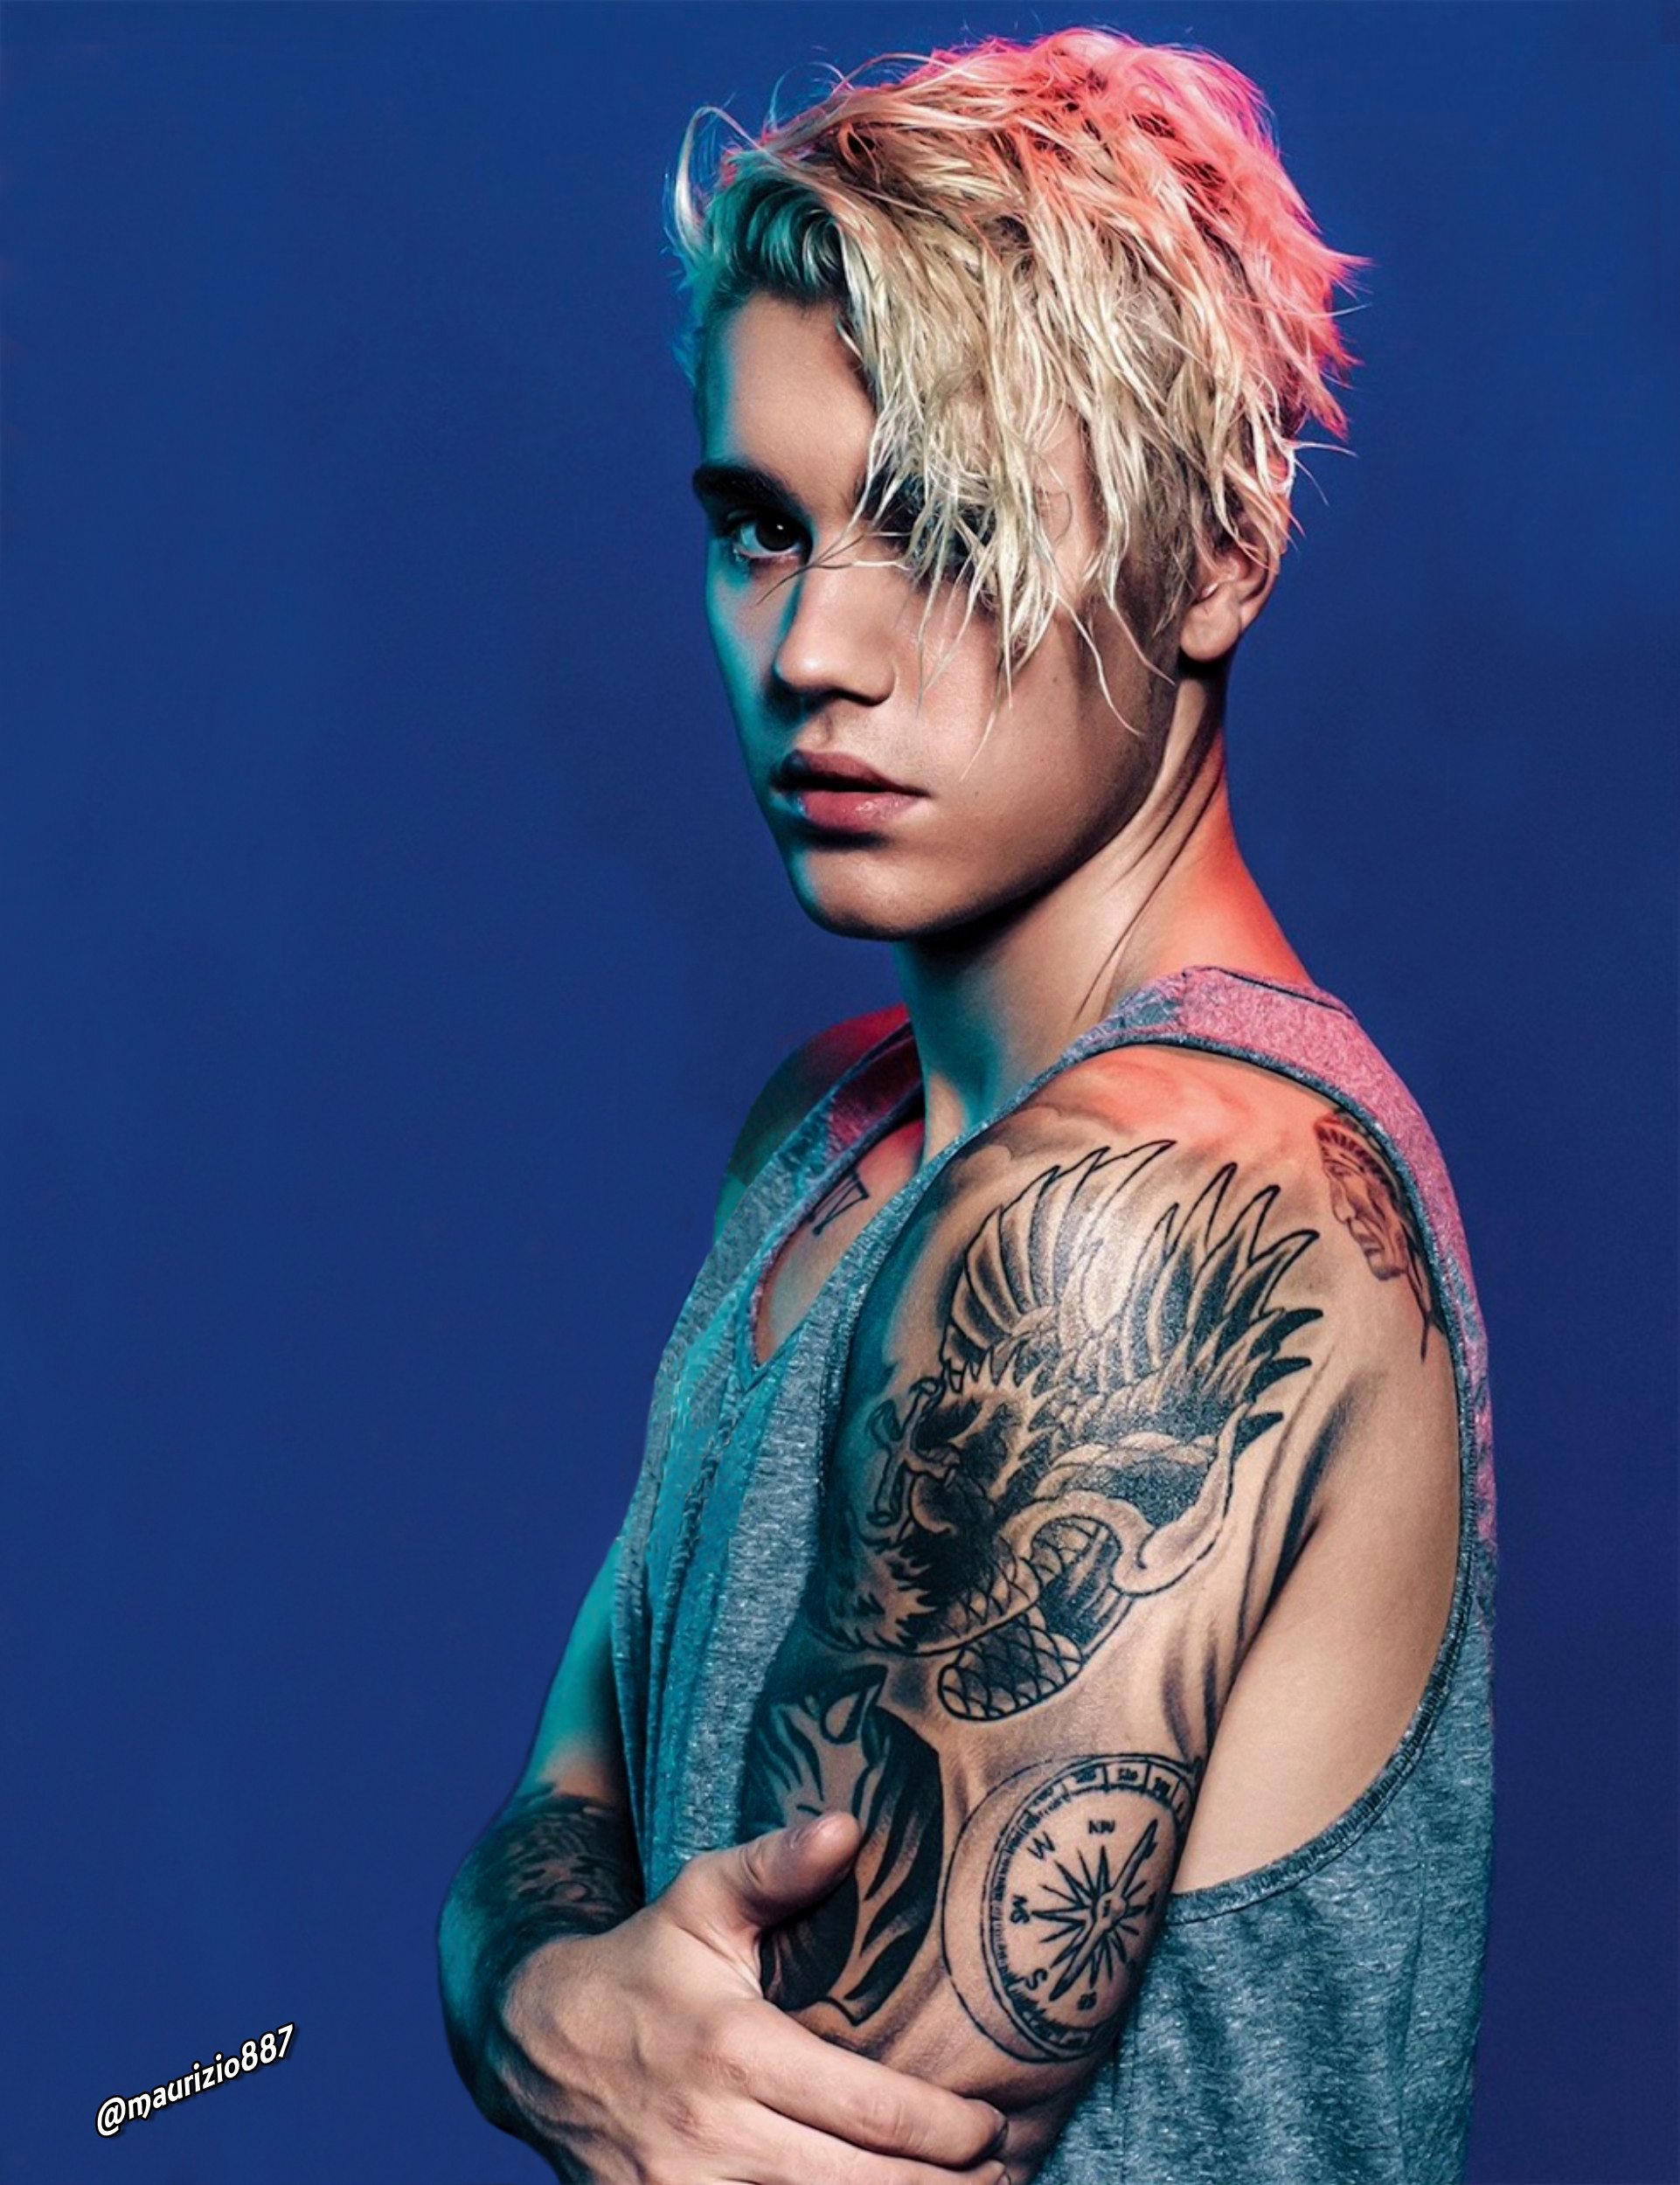 justin bieber new 2015 hairstyle photoshoot #45 - One Punch Man